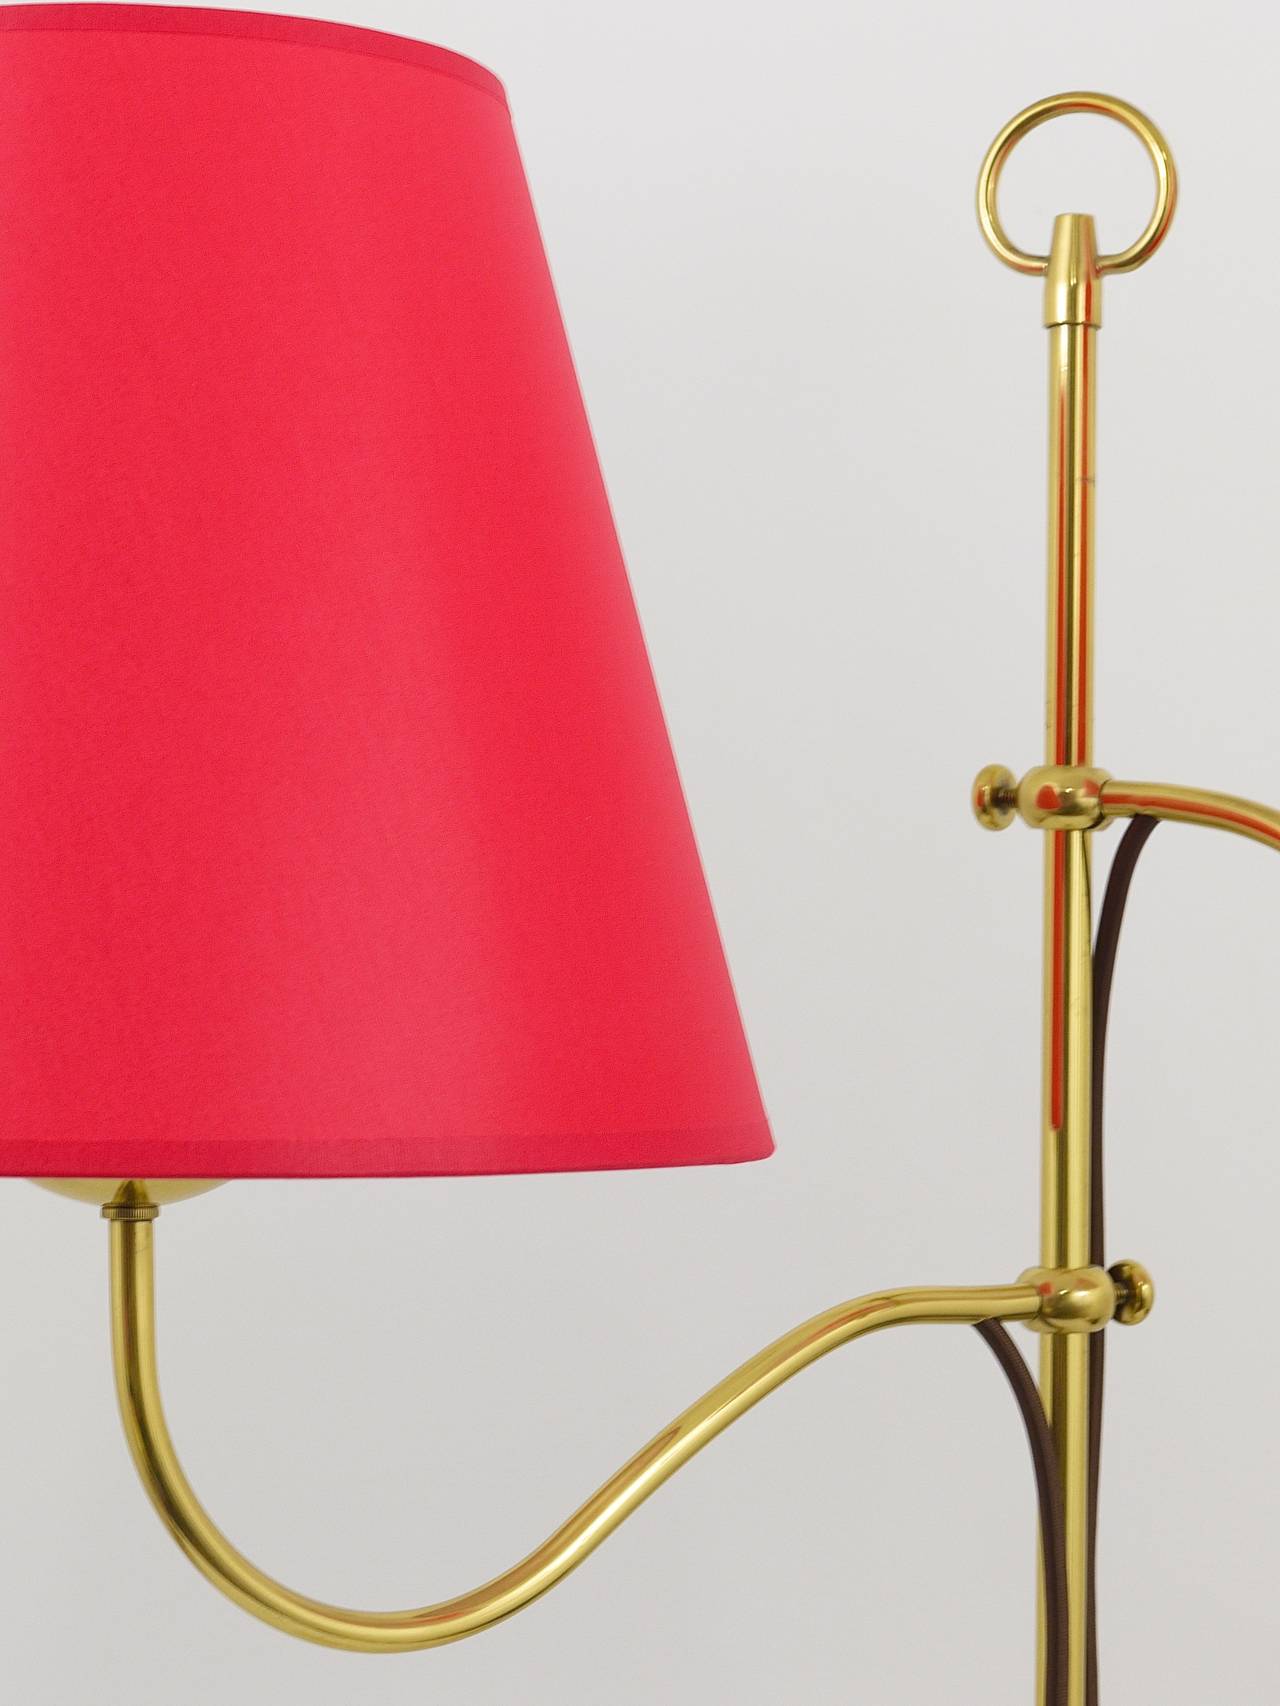 Elegant Two-Arms Mid-Century Brass Floor Lamp by Josef Frank, Austria, 1950 For Sale 3